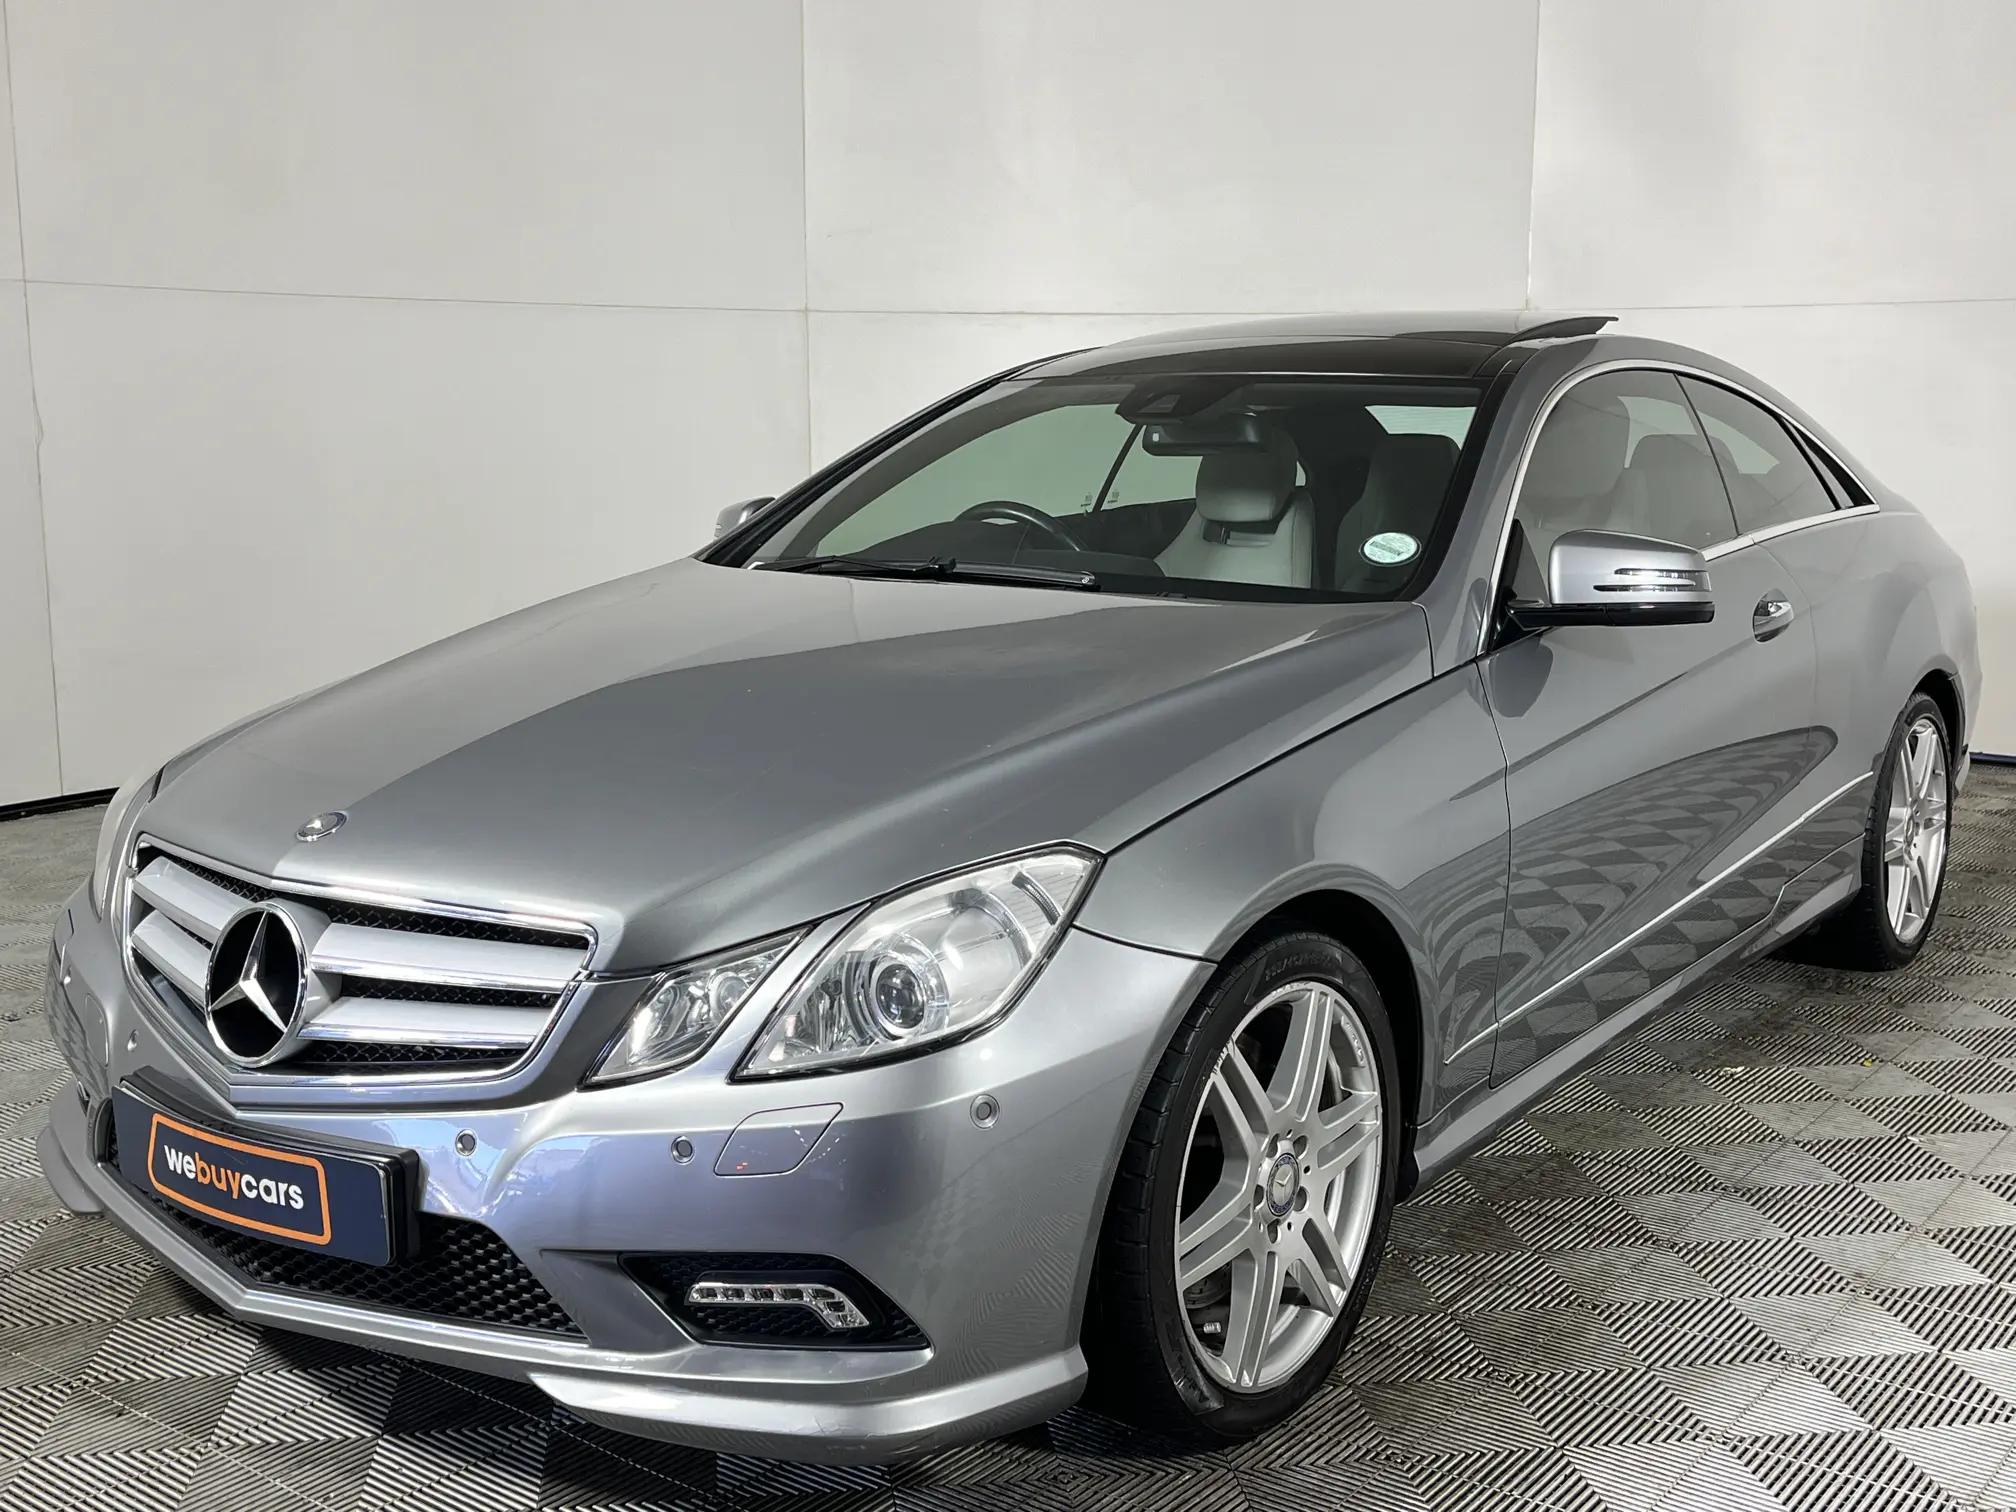 Mercedes Benz E 500 (285 kW) Coupe 7G-Tronic